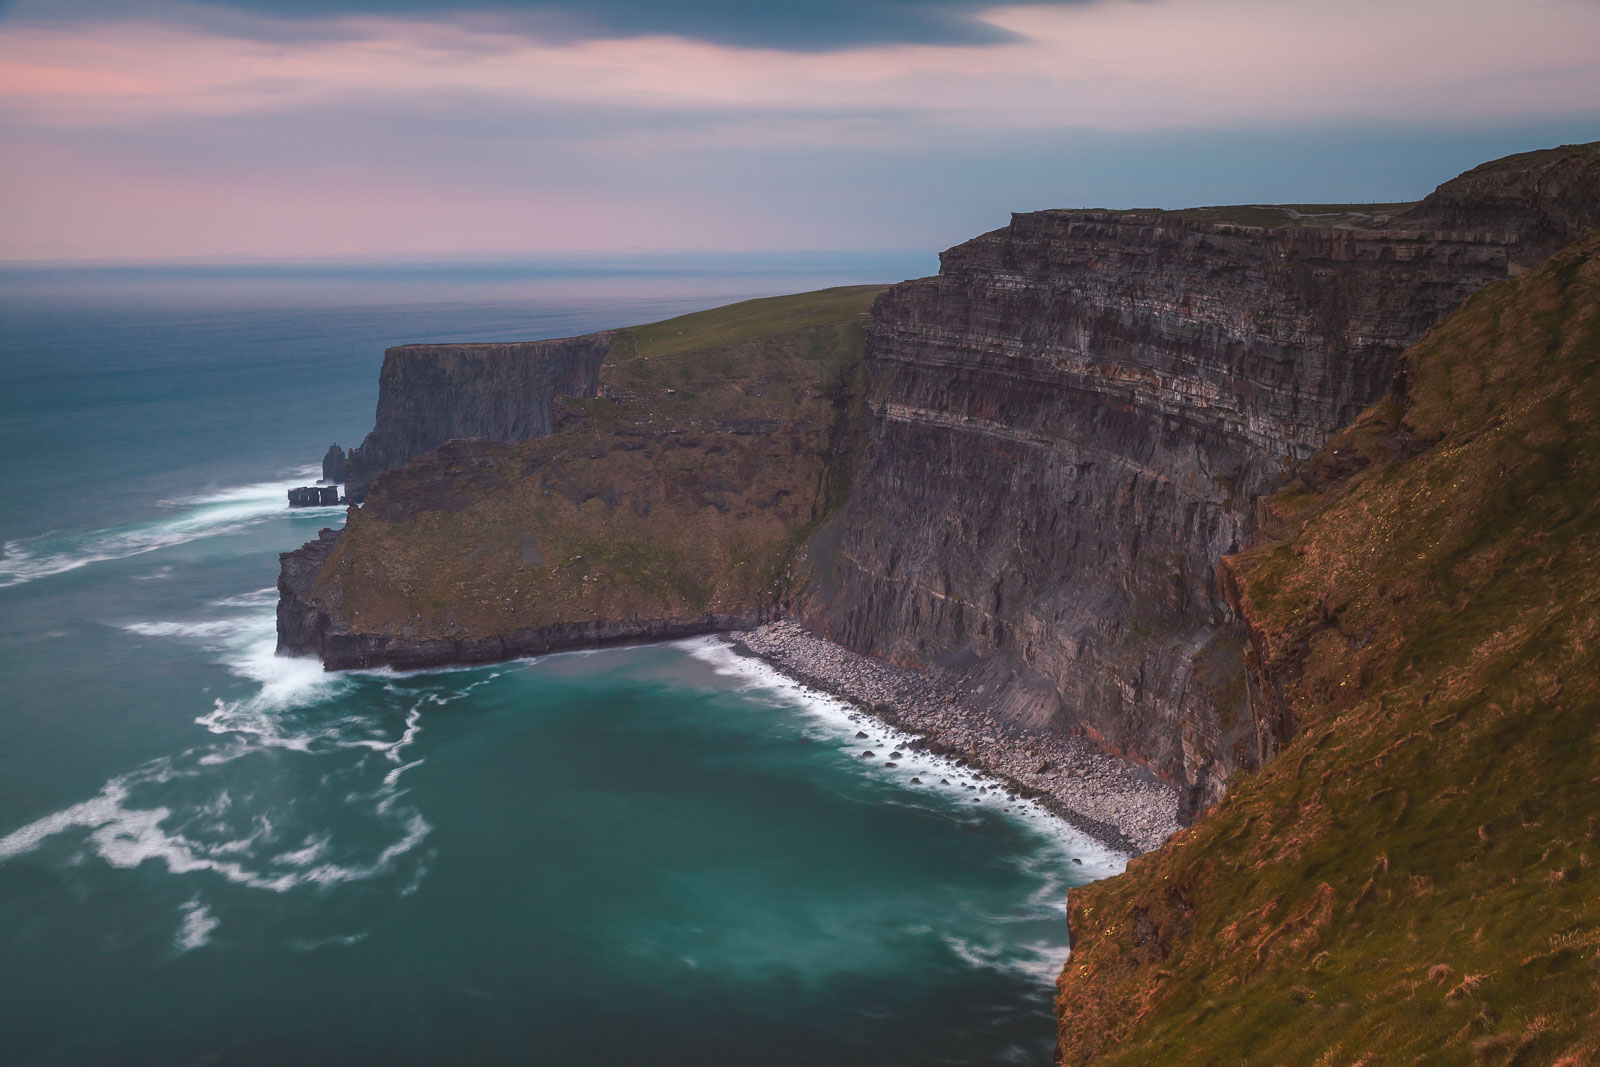 What are the cliffs of Moher